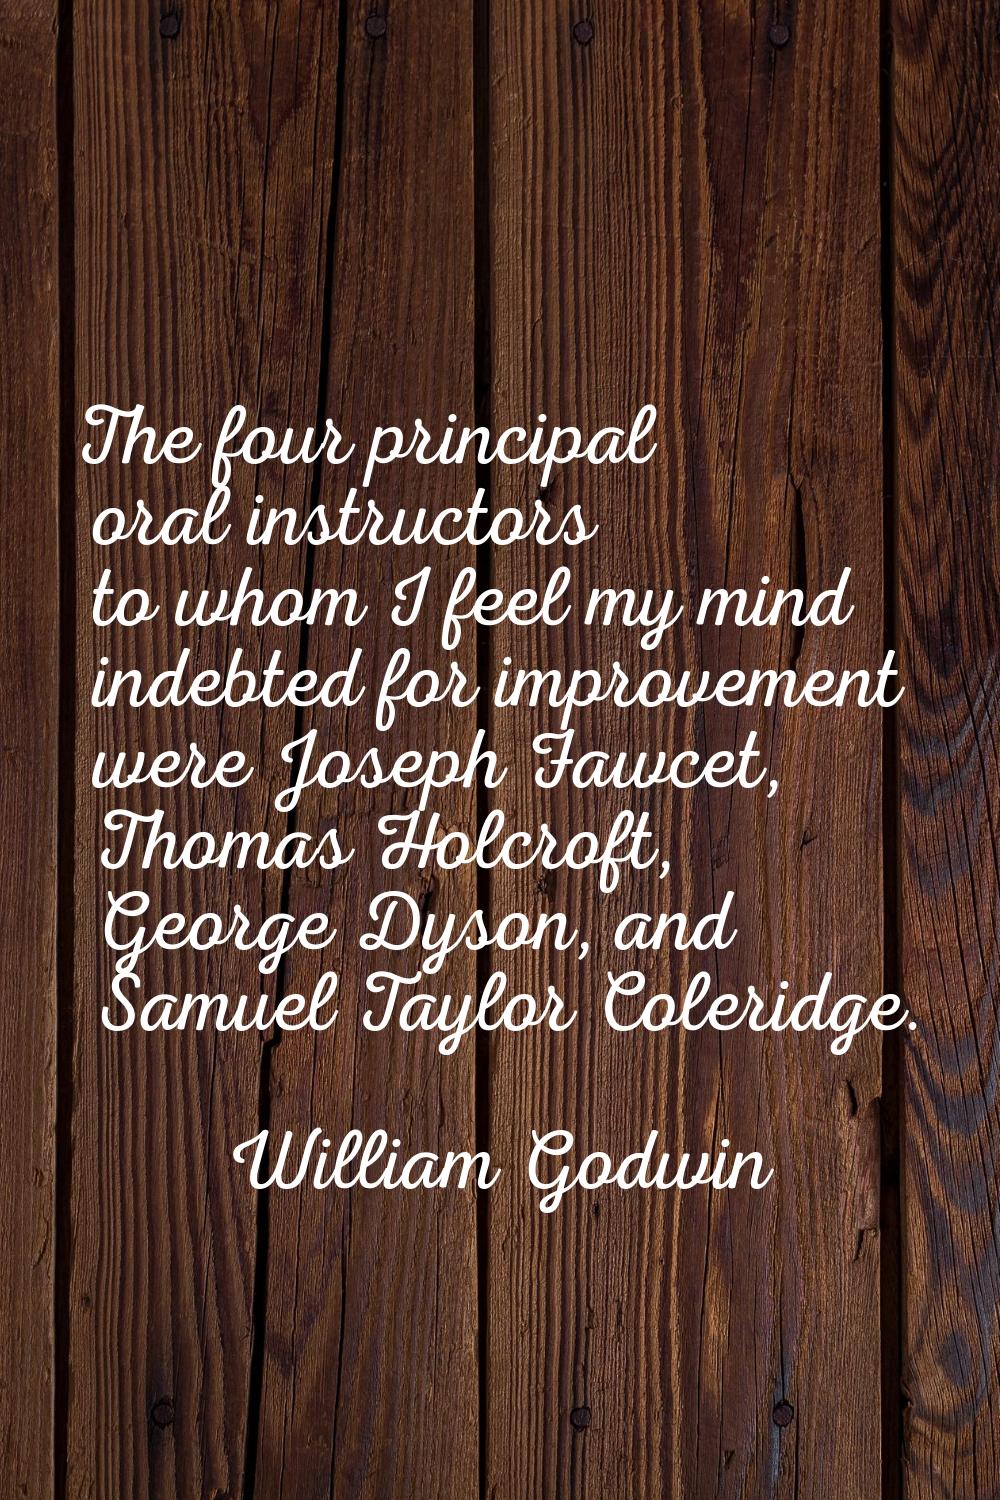 The four principal oral instructors to whom I feel my mind indebted for improvement were Joseph Faw